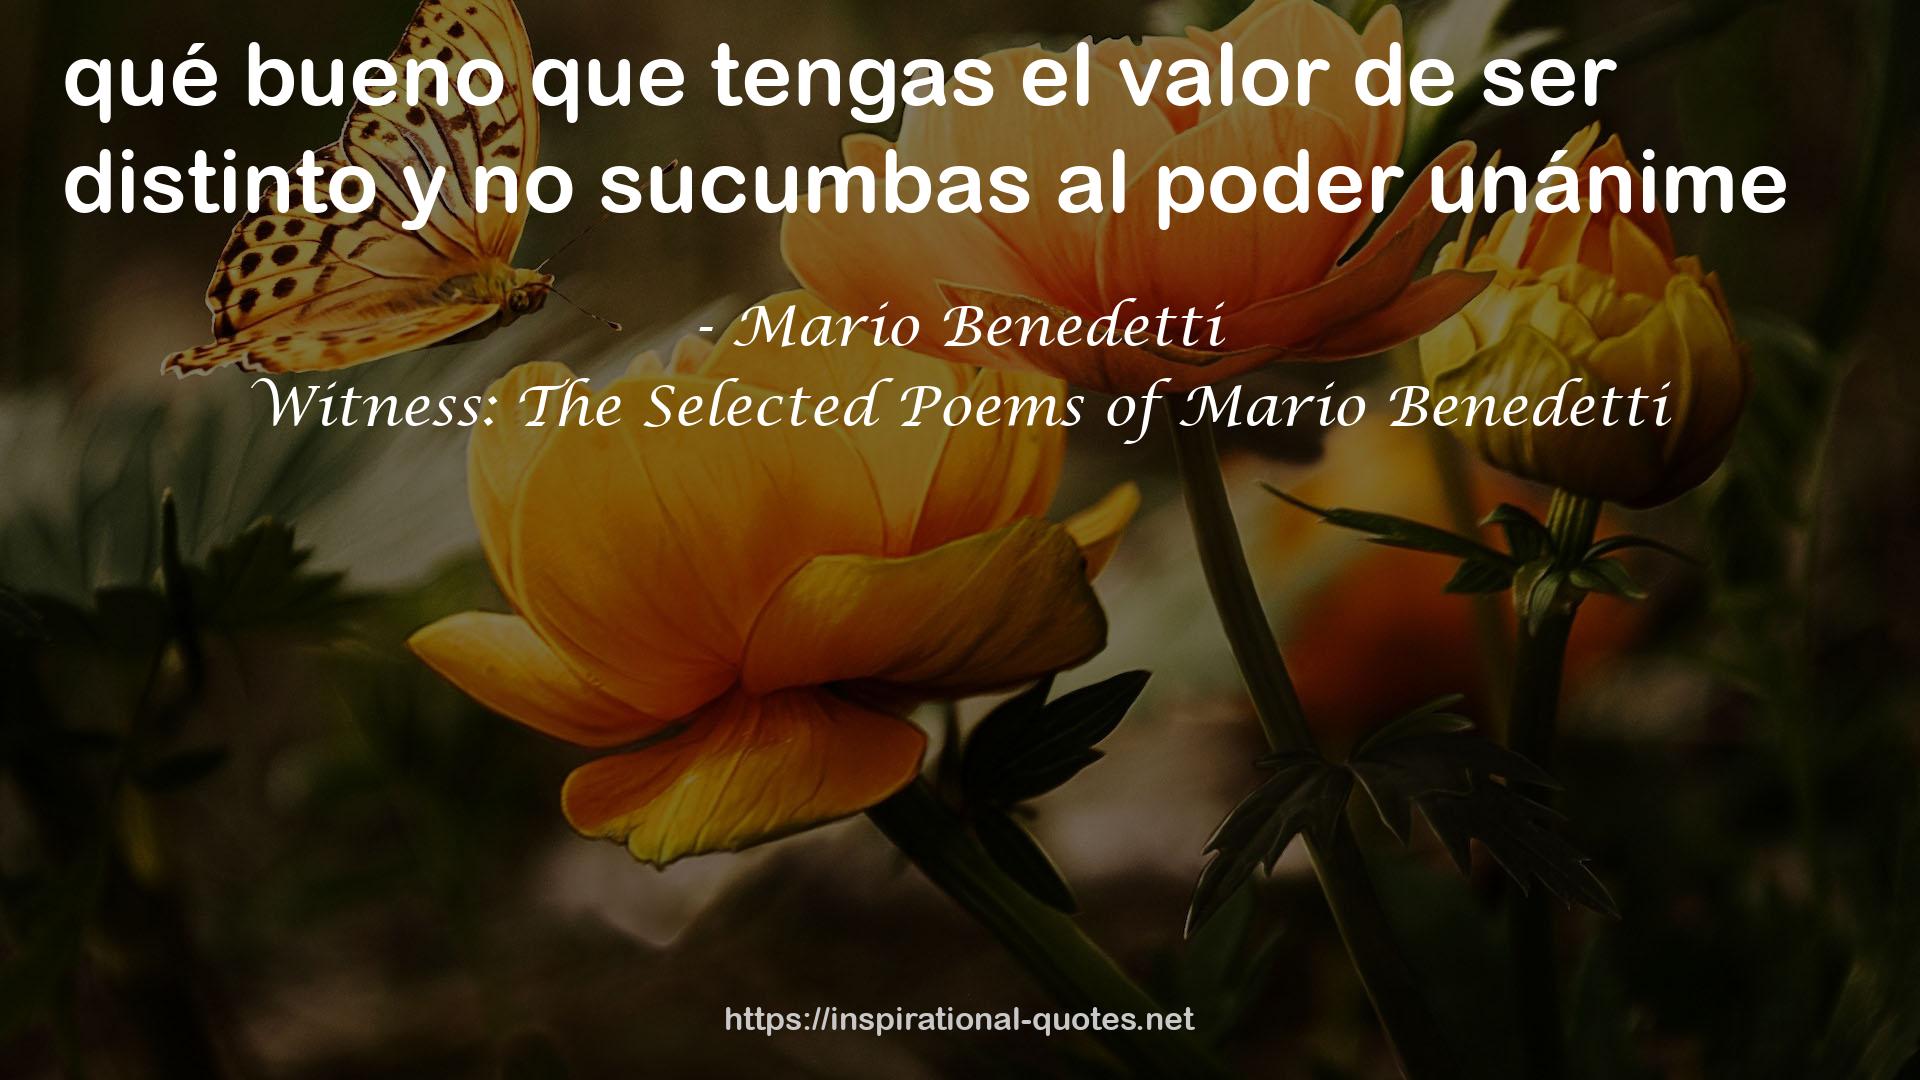 Witness: The Selected Poems of Mario Benedetti QUOTES